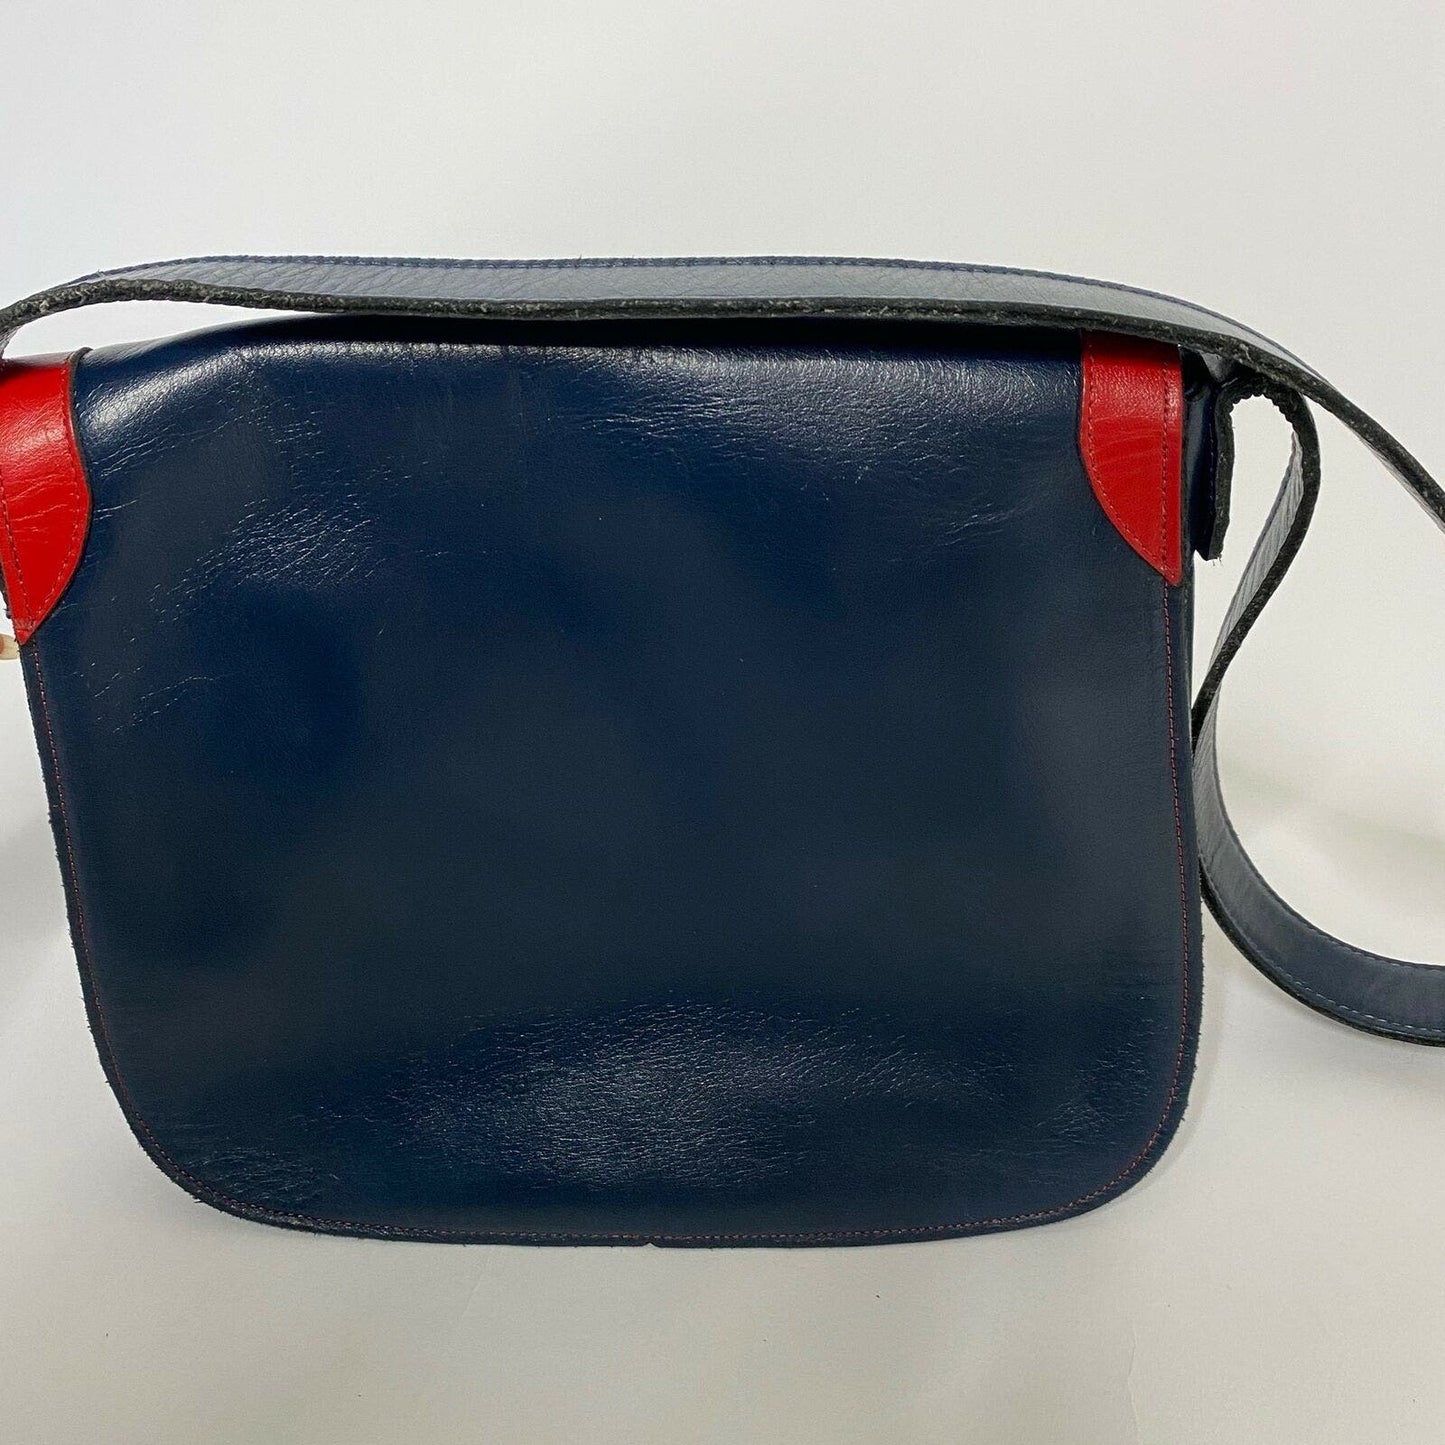 Zona casuals leather crafted crossbody purse